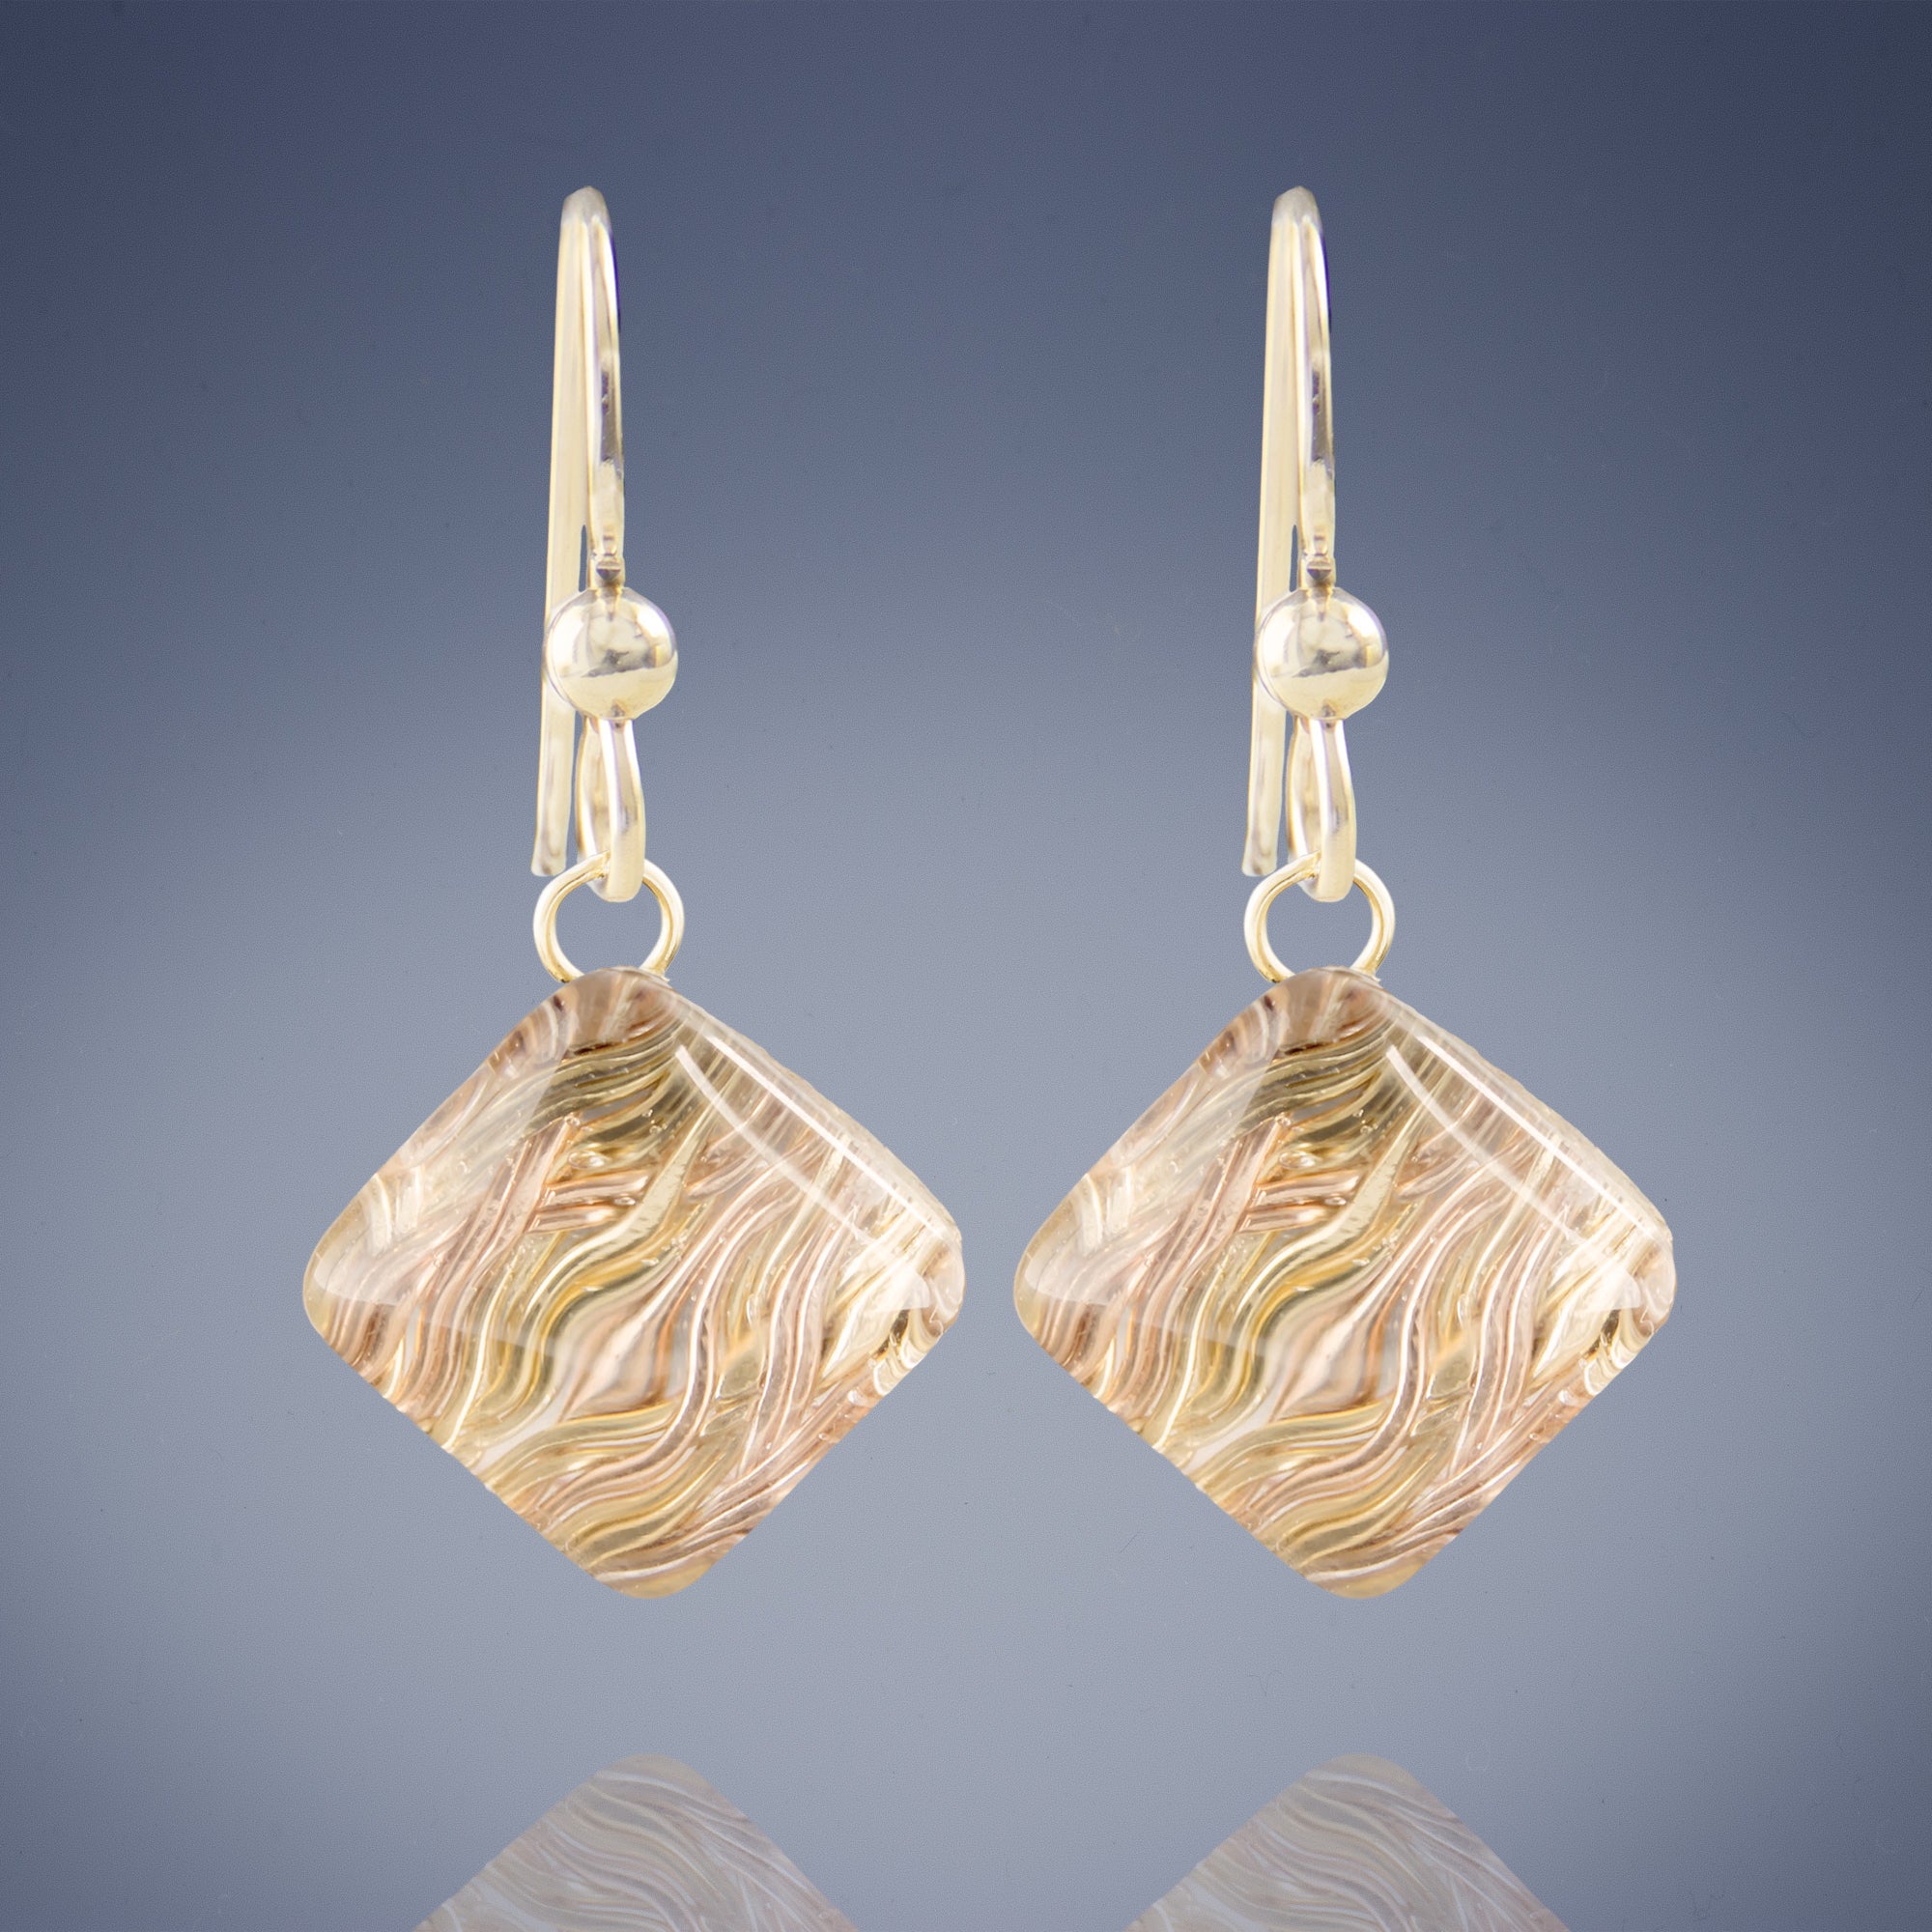 AS SEEN ON Netflix's Jessica Jones: Gold Pyramid Shaped Earrings Featuring Handwoven Metal Fabric and Glass in 14K Yellow and Rose Gold Fill